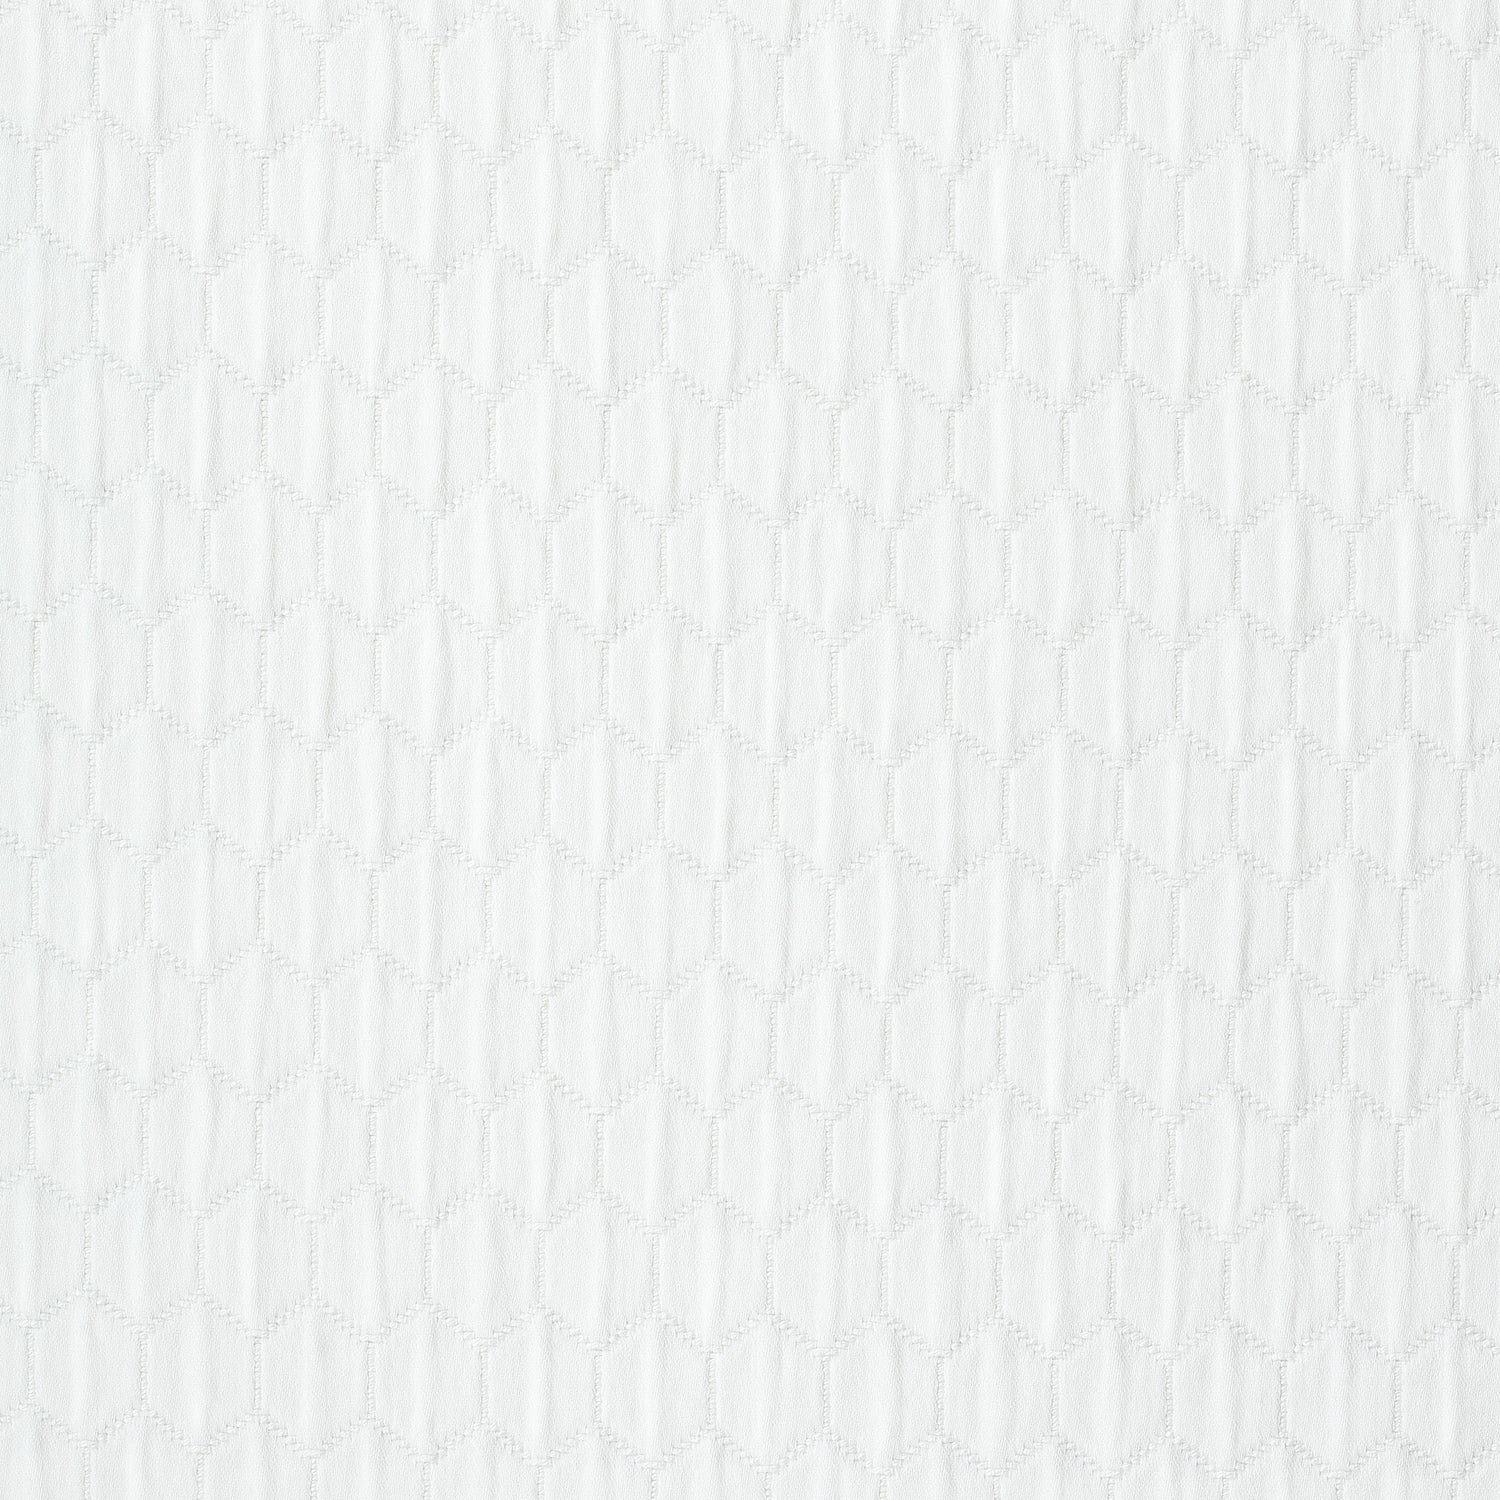 Beacroft Matelasse fabric in off white color - pattern number W772572 - by Thibaut in the Chestnut Hill collection